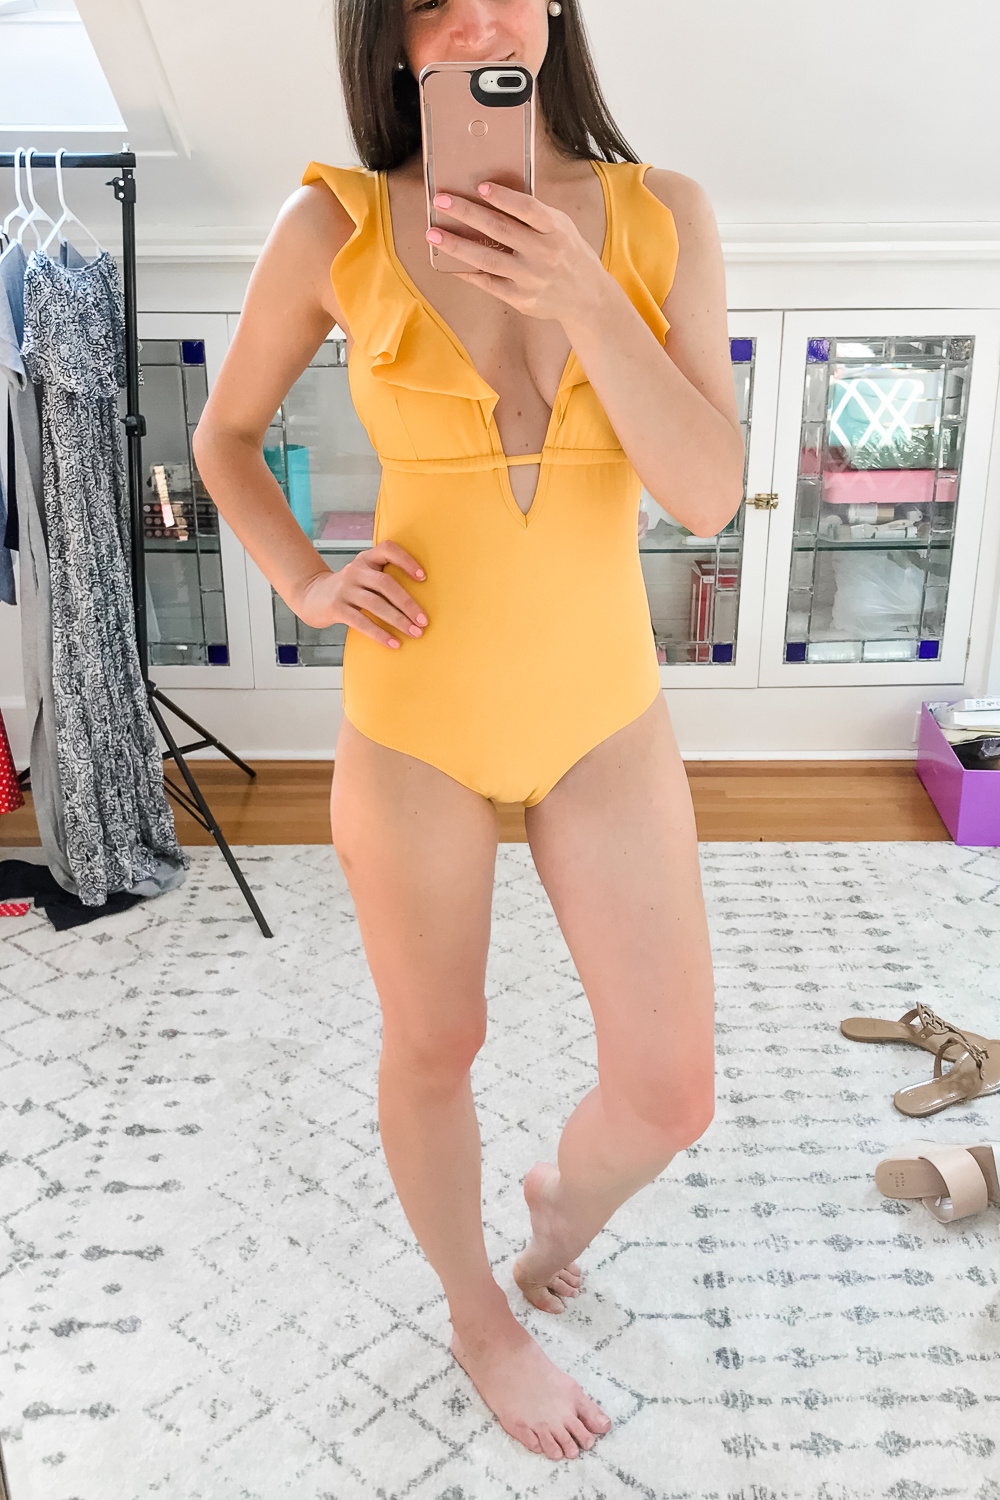 Yellow CUPSHE Deep V Ruffle Monokini on Amazon, Amazon Summer Try-On Haul and Style Picks by popular affordable fashion blogger Stephanie Ziajka from Diary of a Debutante